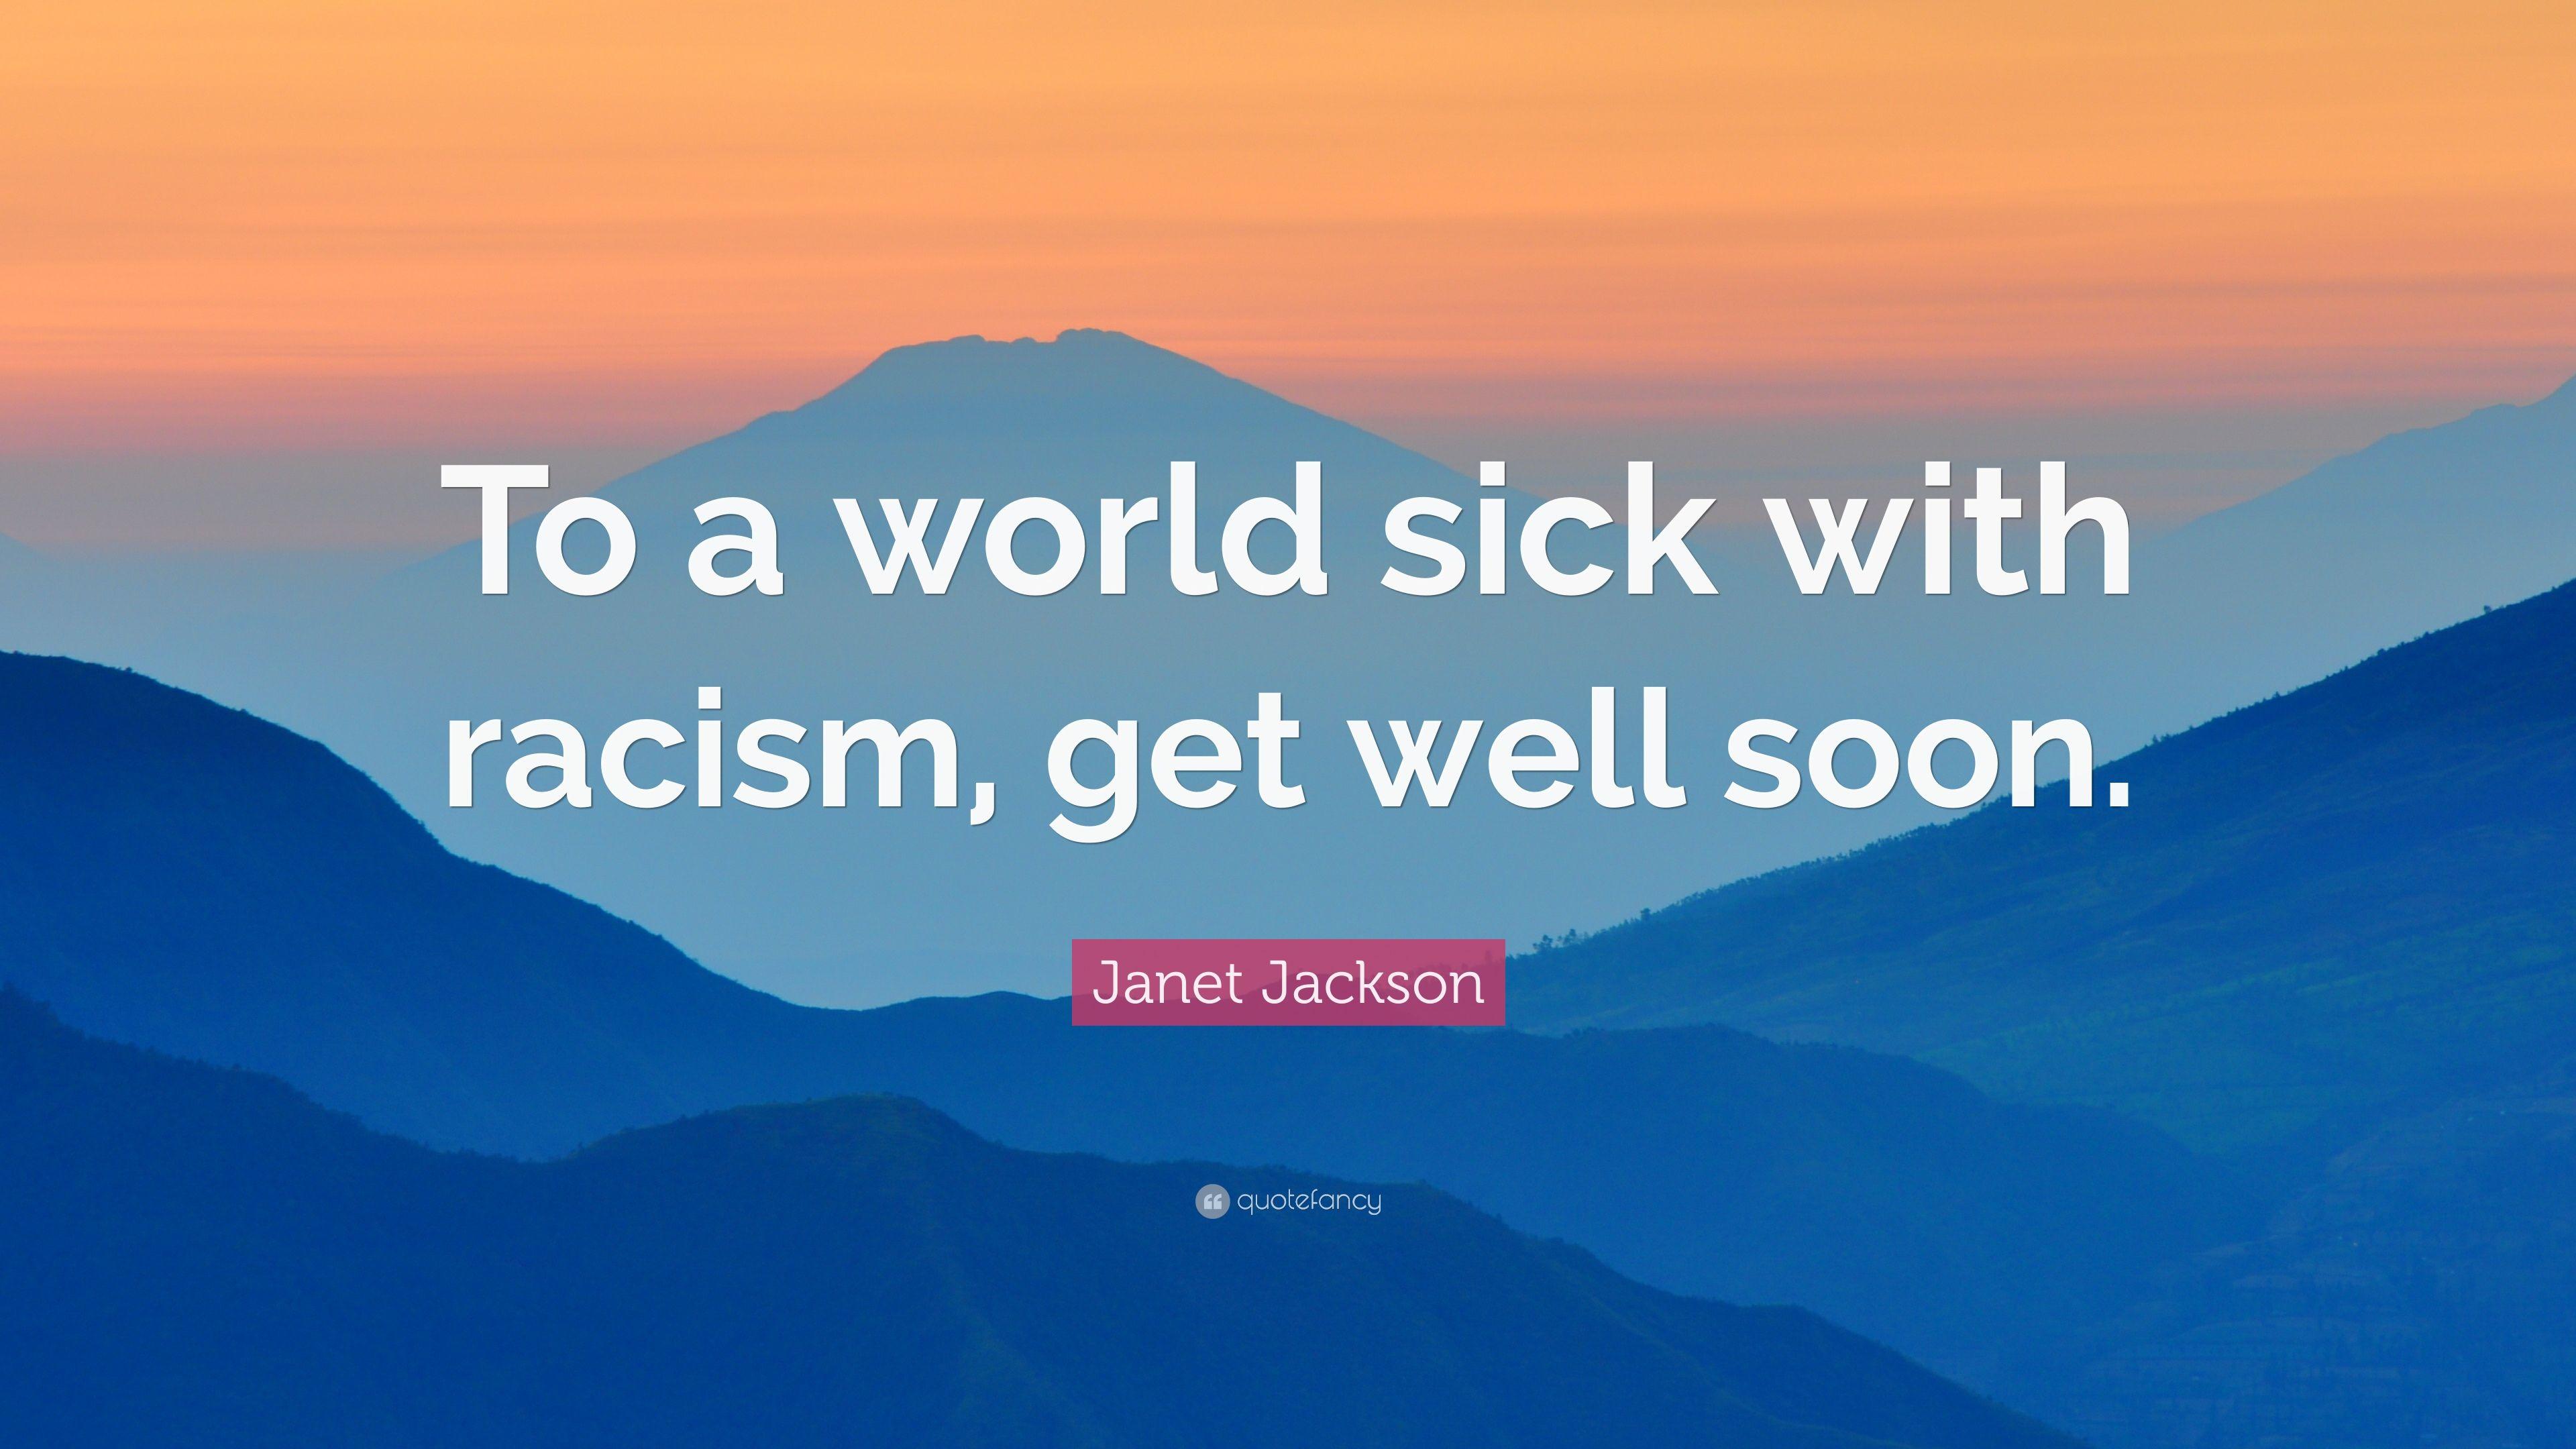 Janet Jackson Quote: “To a world sick with racism, get well soon